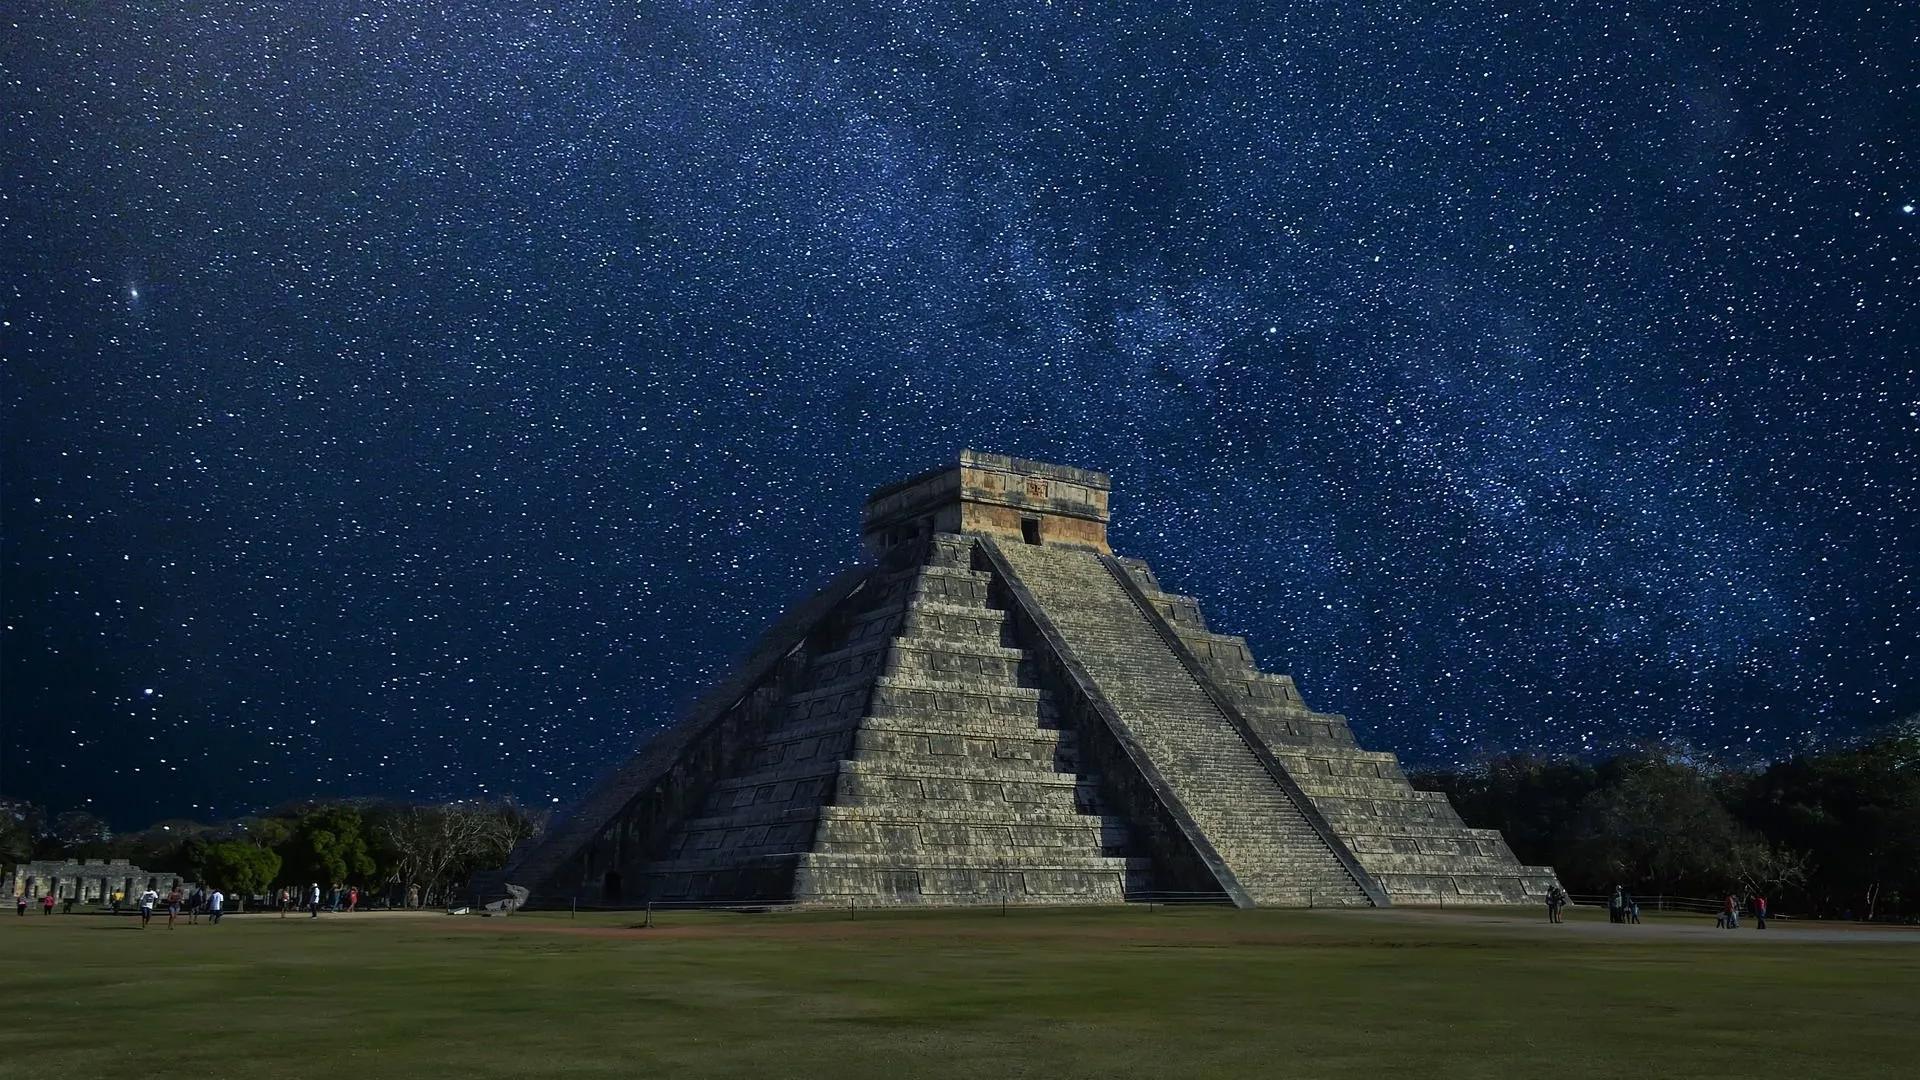 ‘Game Changer’ — Huge Network of Ancient Mayan Cities and Highways Could Rewrite History